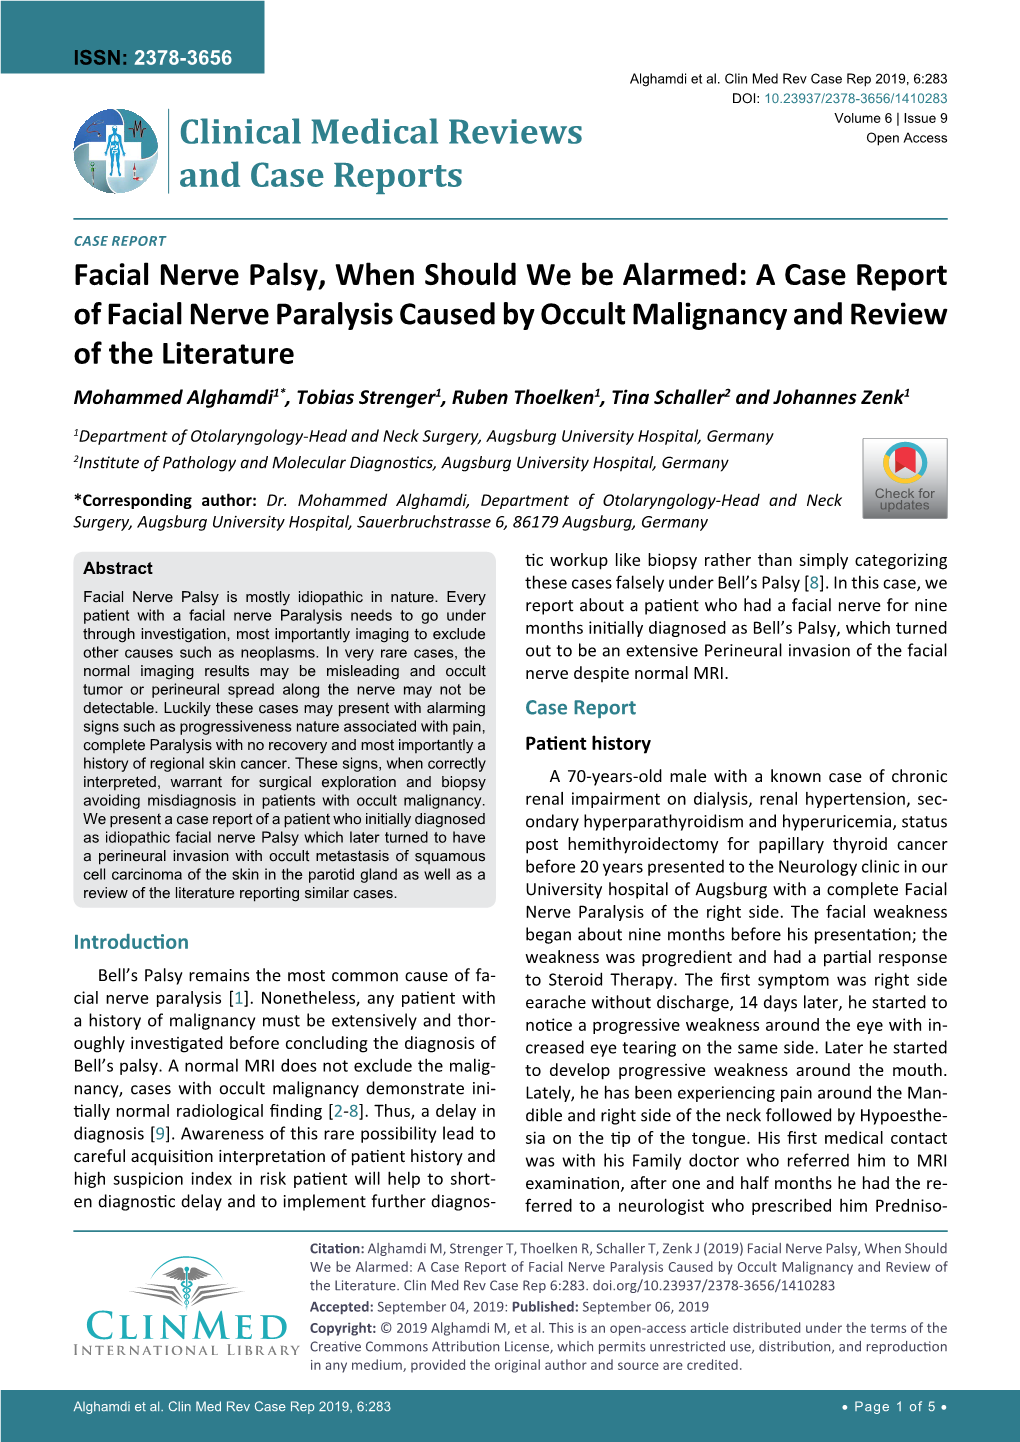 A Case Report of Facial Nerve Paralysis Caused by Occult Malignancy and Review Of